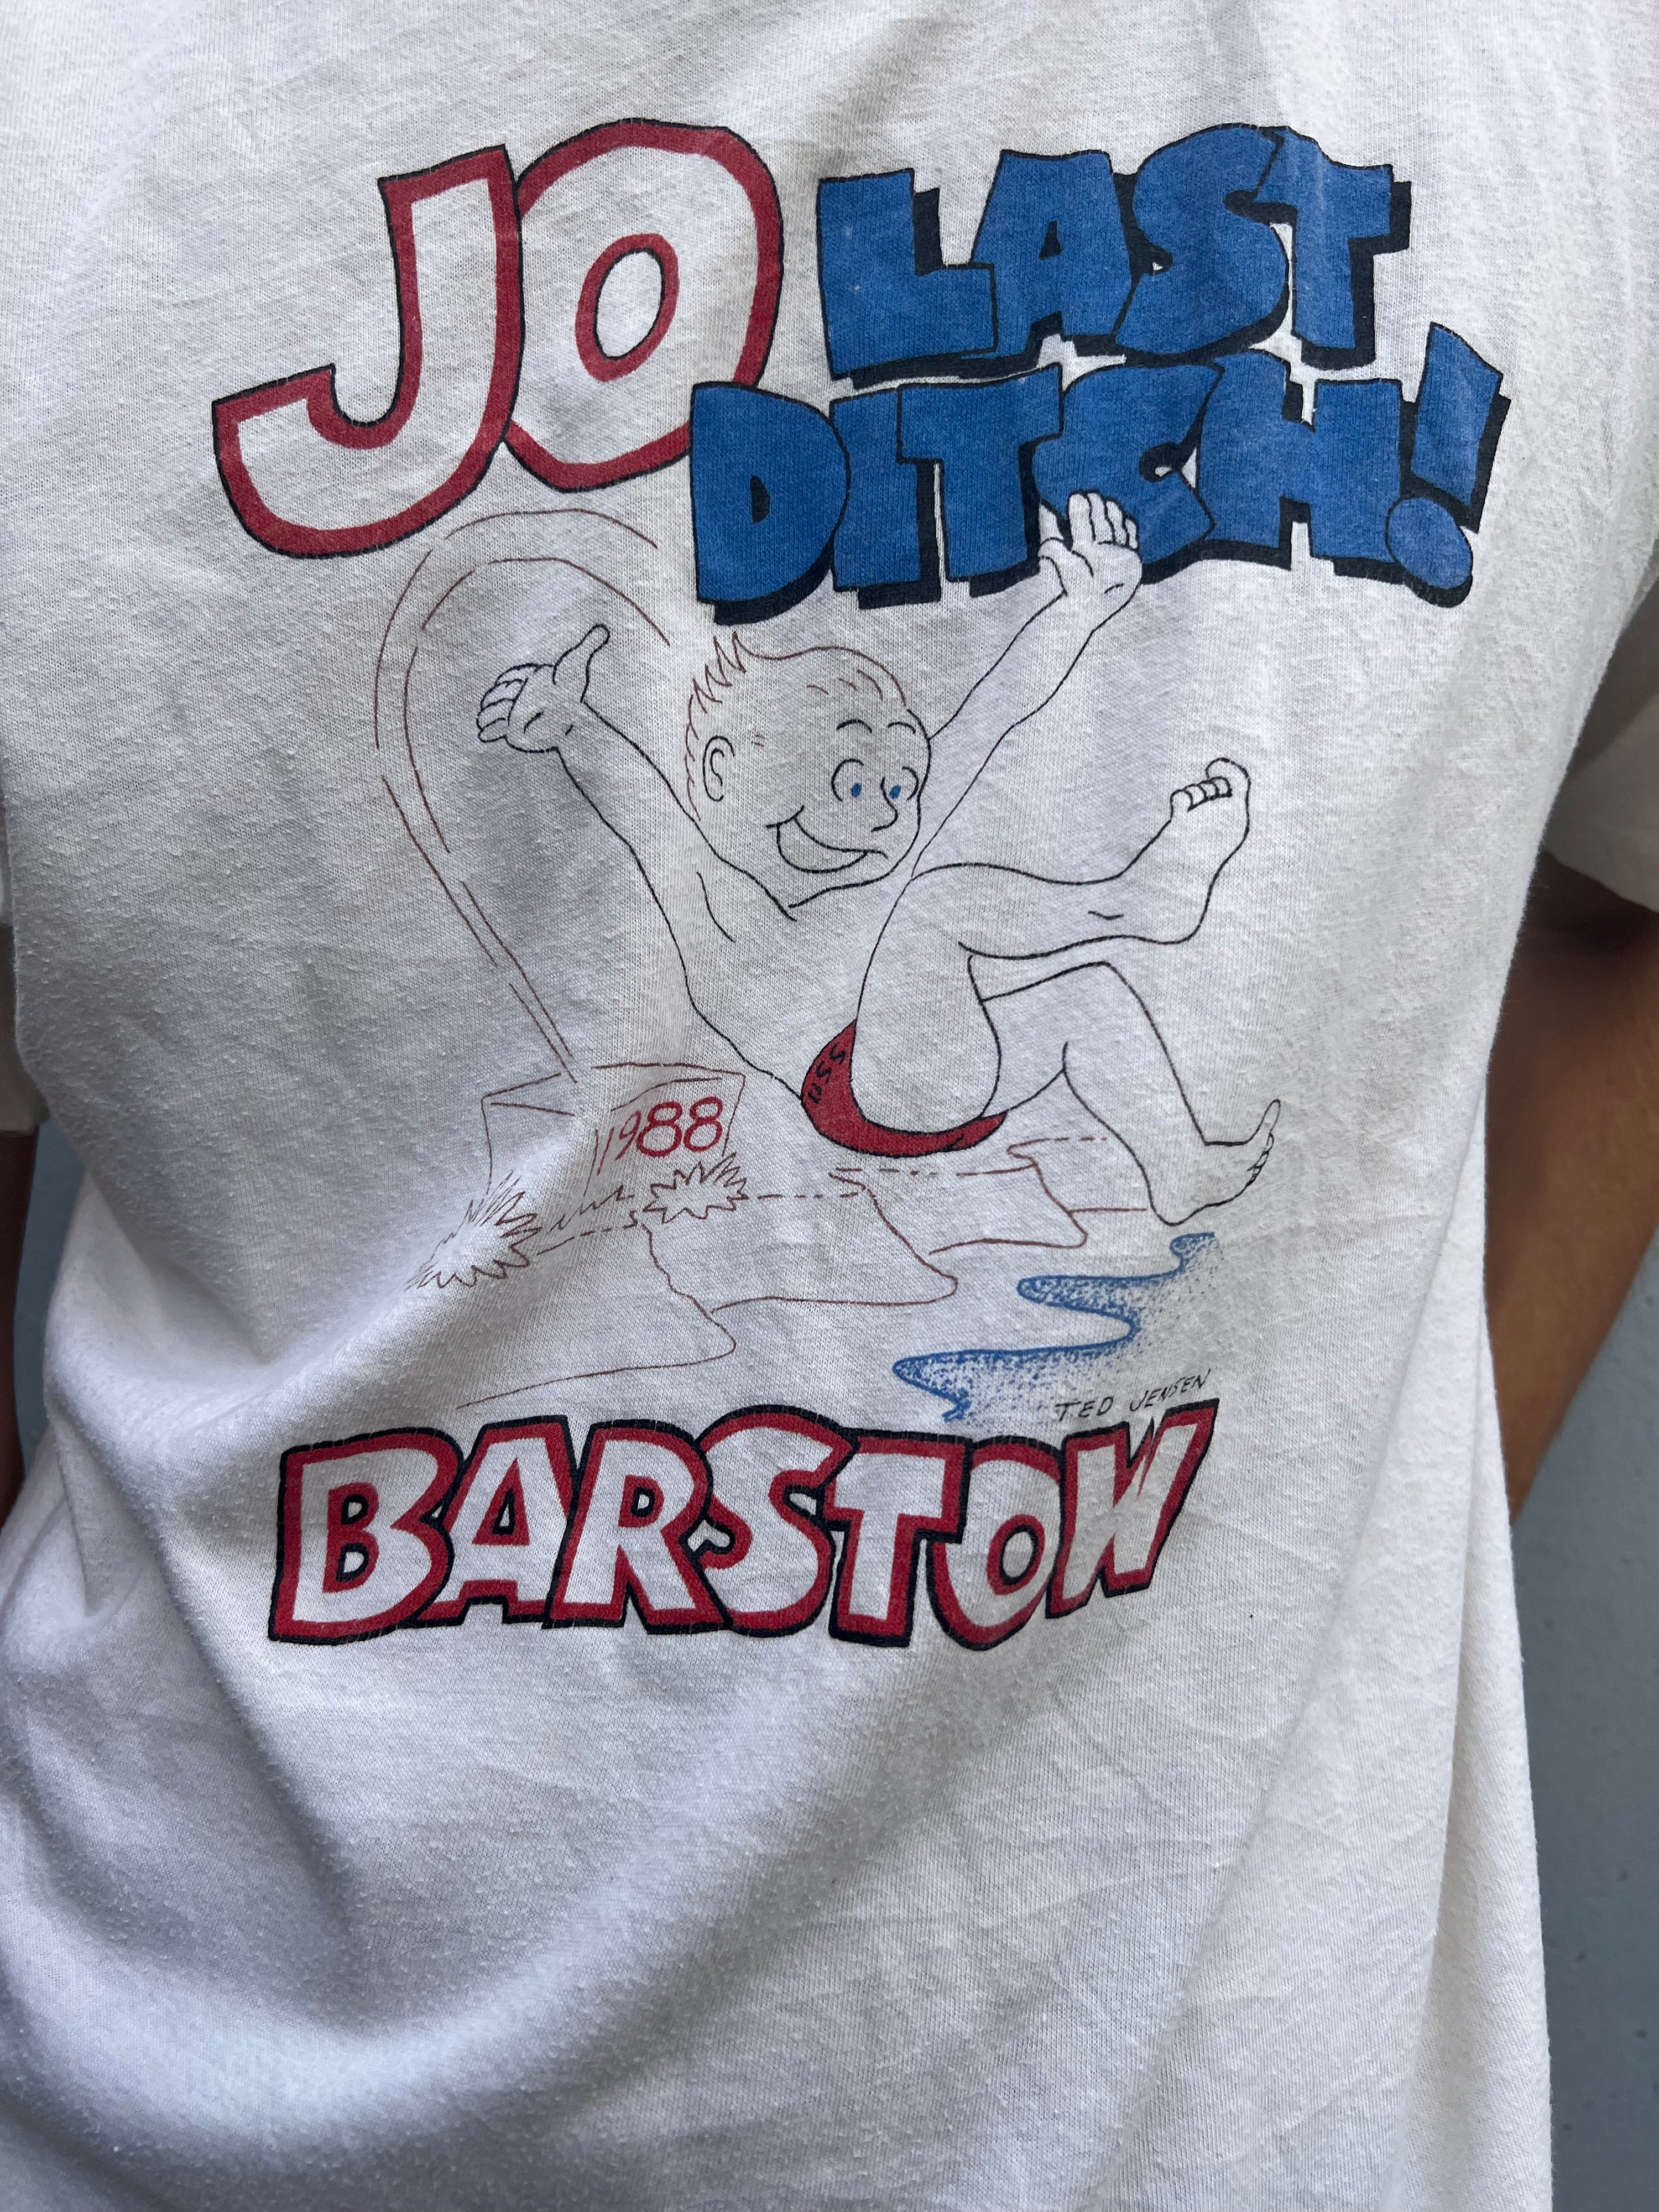 Vintage 1988 Single Stitched Jo Last Ditsch Ted Jensen Barstow T-Shirt USS United States Ship (M)